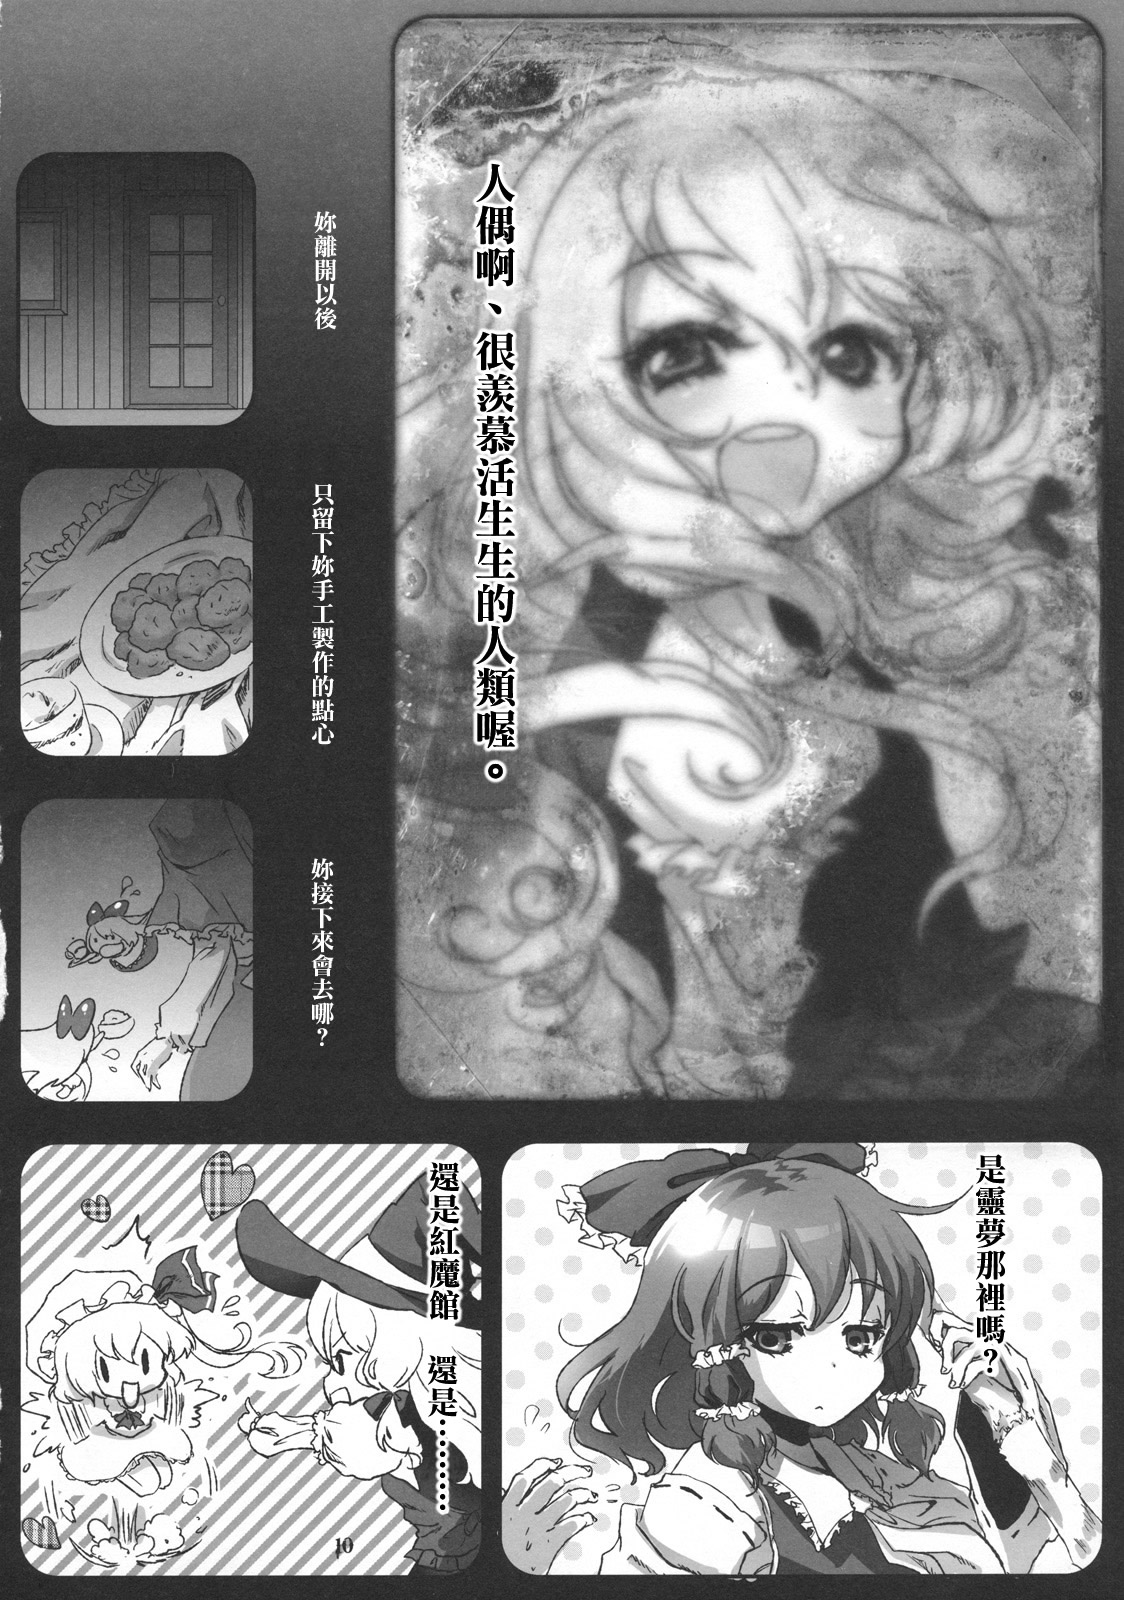 (C79) [Chaotic Wolf (Inuboe)] FILTH IN THE ENVY (Touhou Project) [Chinese] [Genesis漢化] (C79) (同人誌) [Chaotic Wolf (狗吠)] FILTH IN THE ENVY (東方) [中文翻譯]